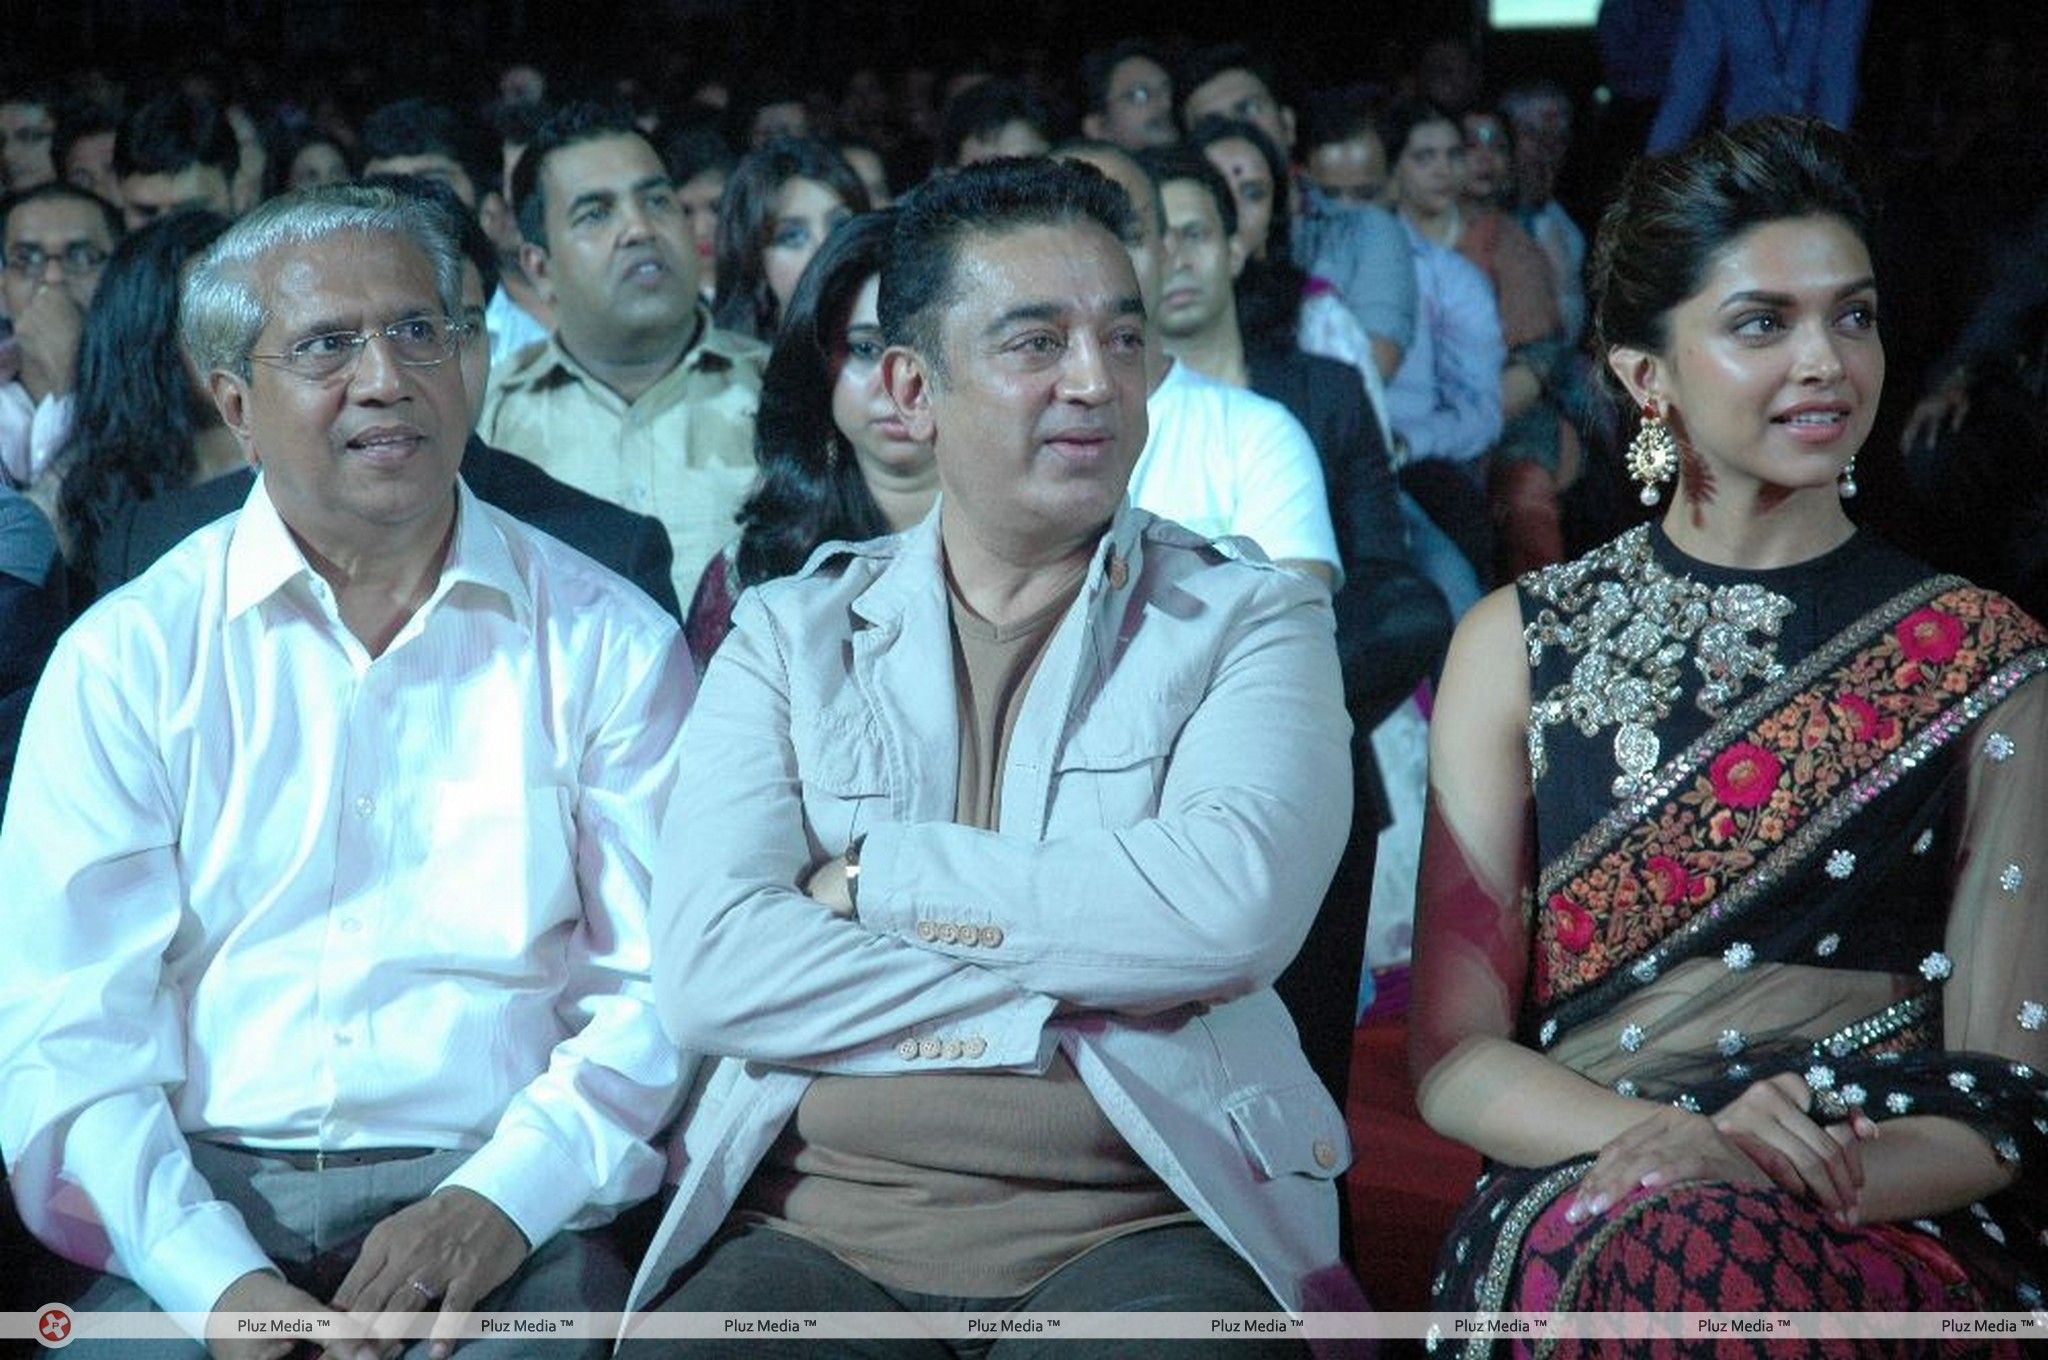 Kamal Hassan - 59th South Indian Filmfare Awards Stills  | Picture 225552